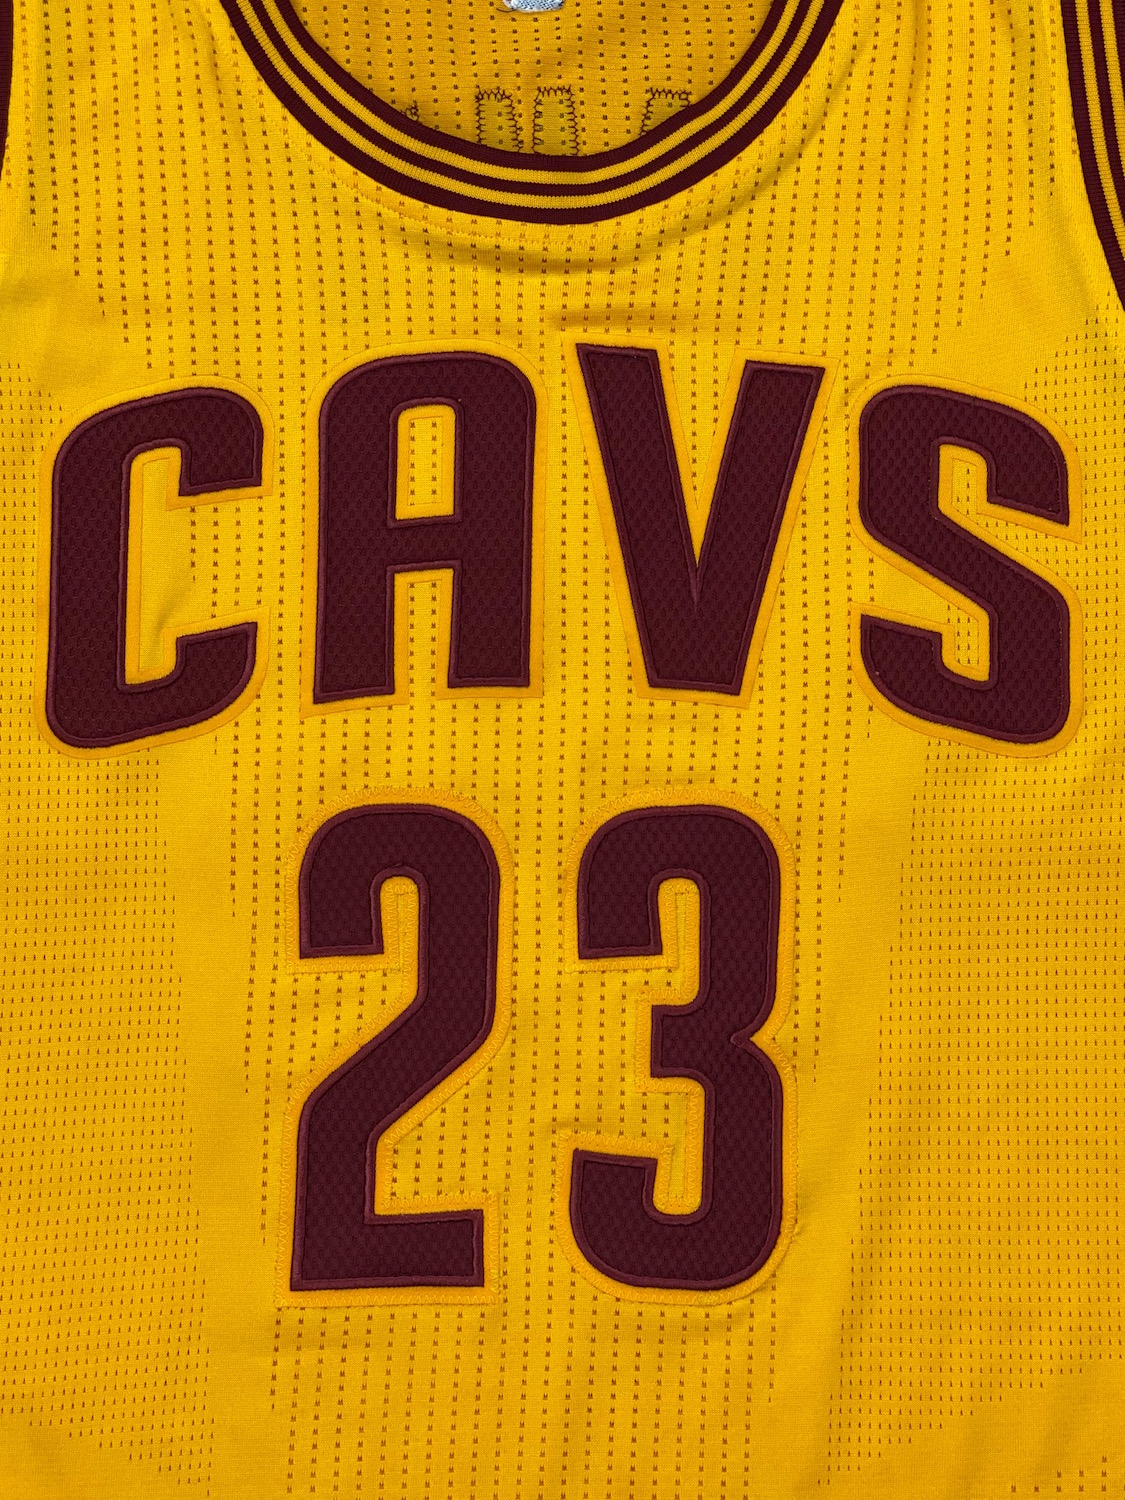 Jersey for the Cleveland Cavaliers worn and signed by LeBron James